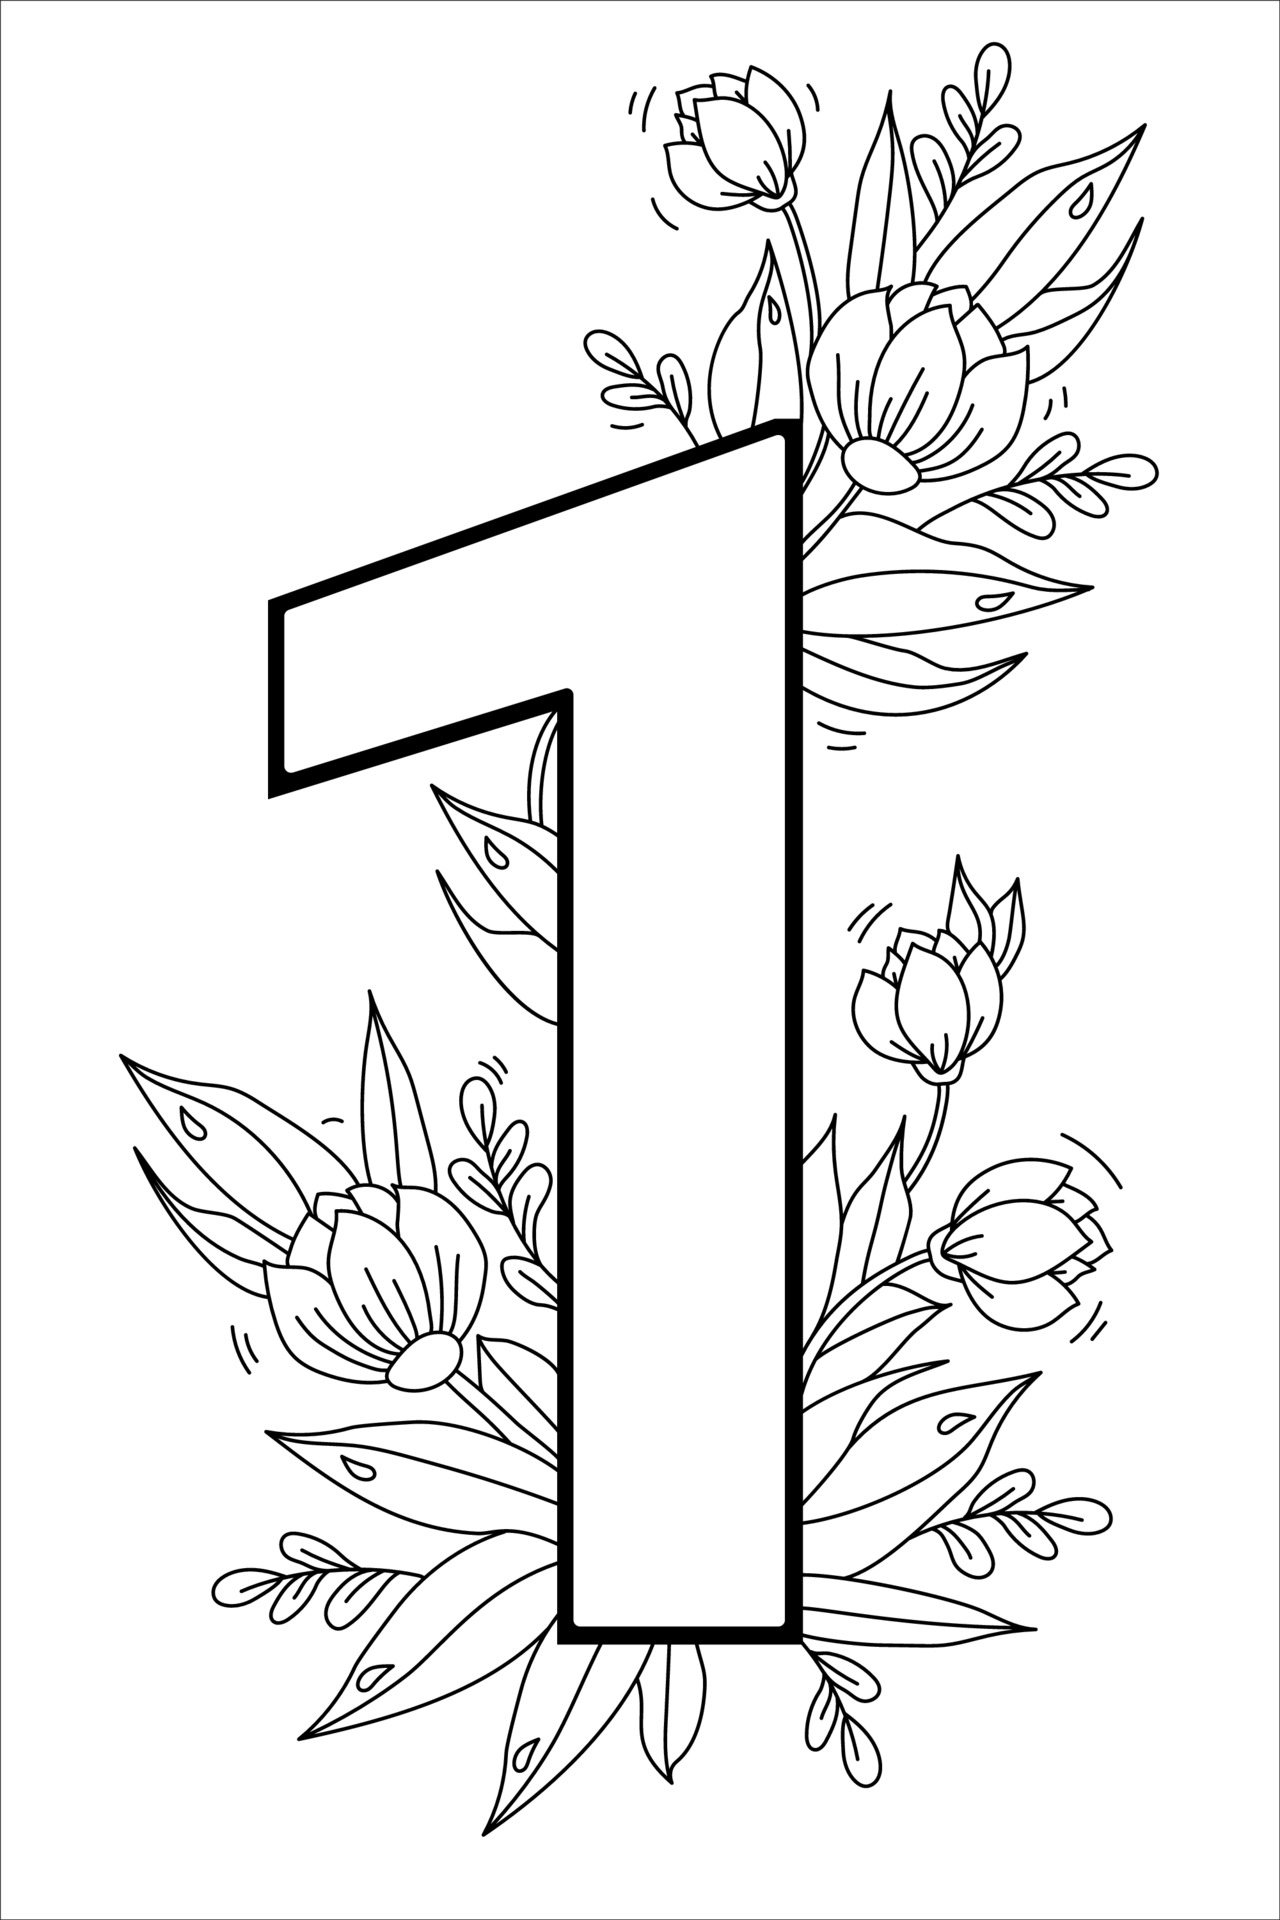 flower number digit one decorative pattern 1 with flowers tulips buds and leaves vector illustration isolated on white background line outline for greeting cards print design and decoration 2132628 vector art at vecteezy